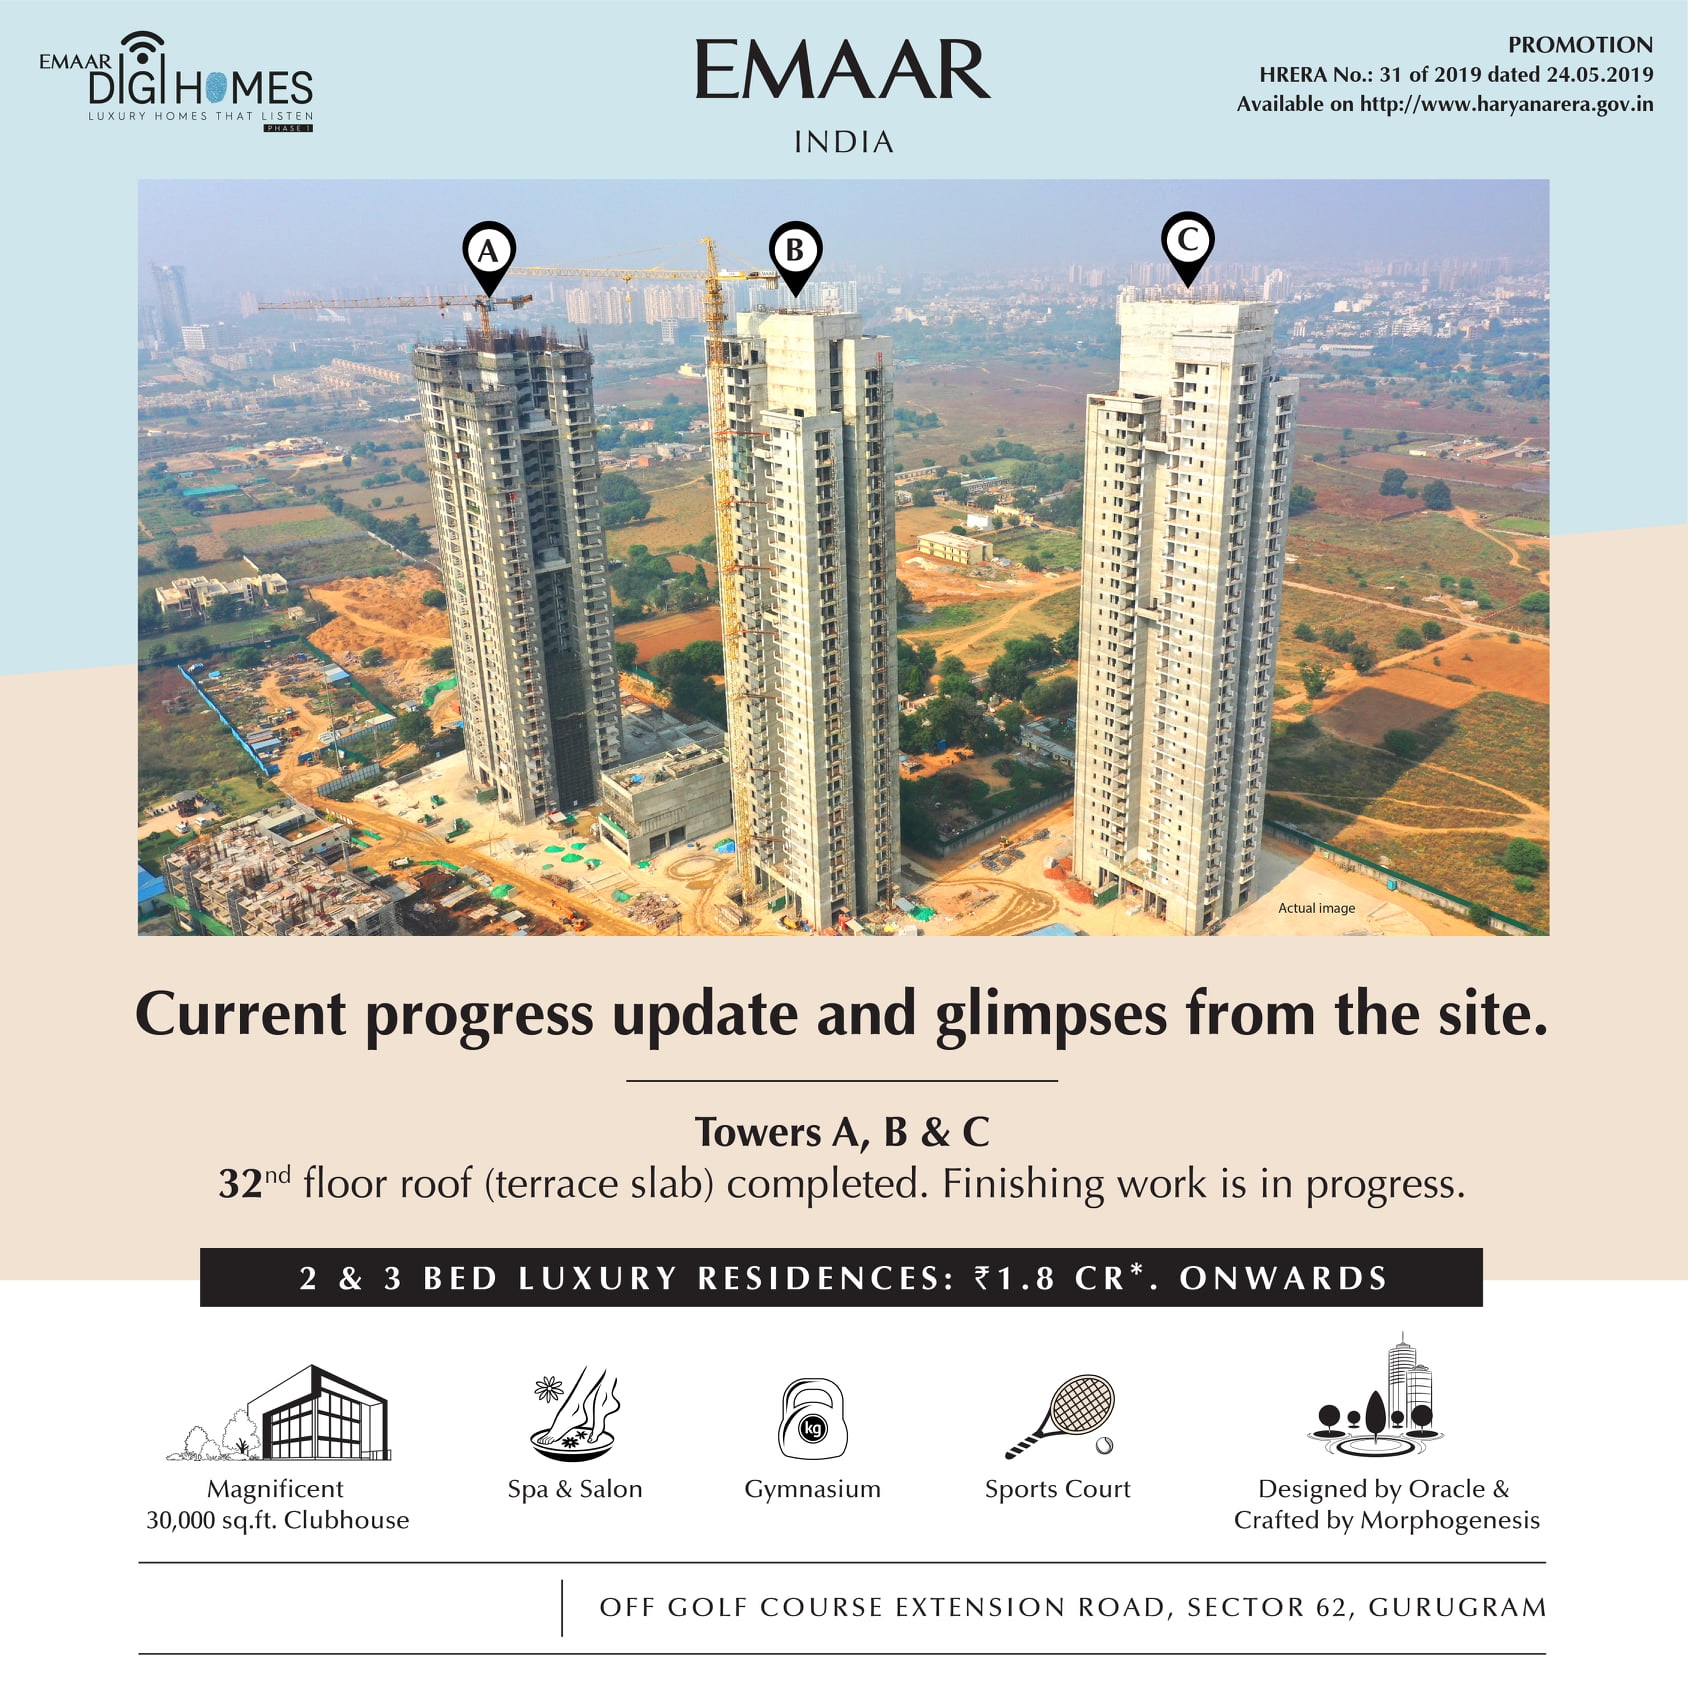 Current progress update and glimpses from the site at Emaar Digi Homes in Gurgaon Update